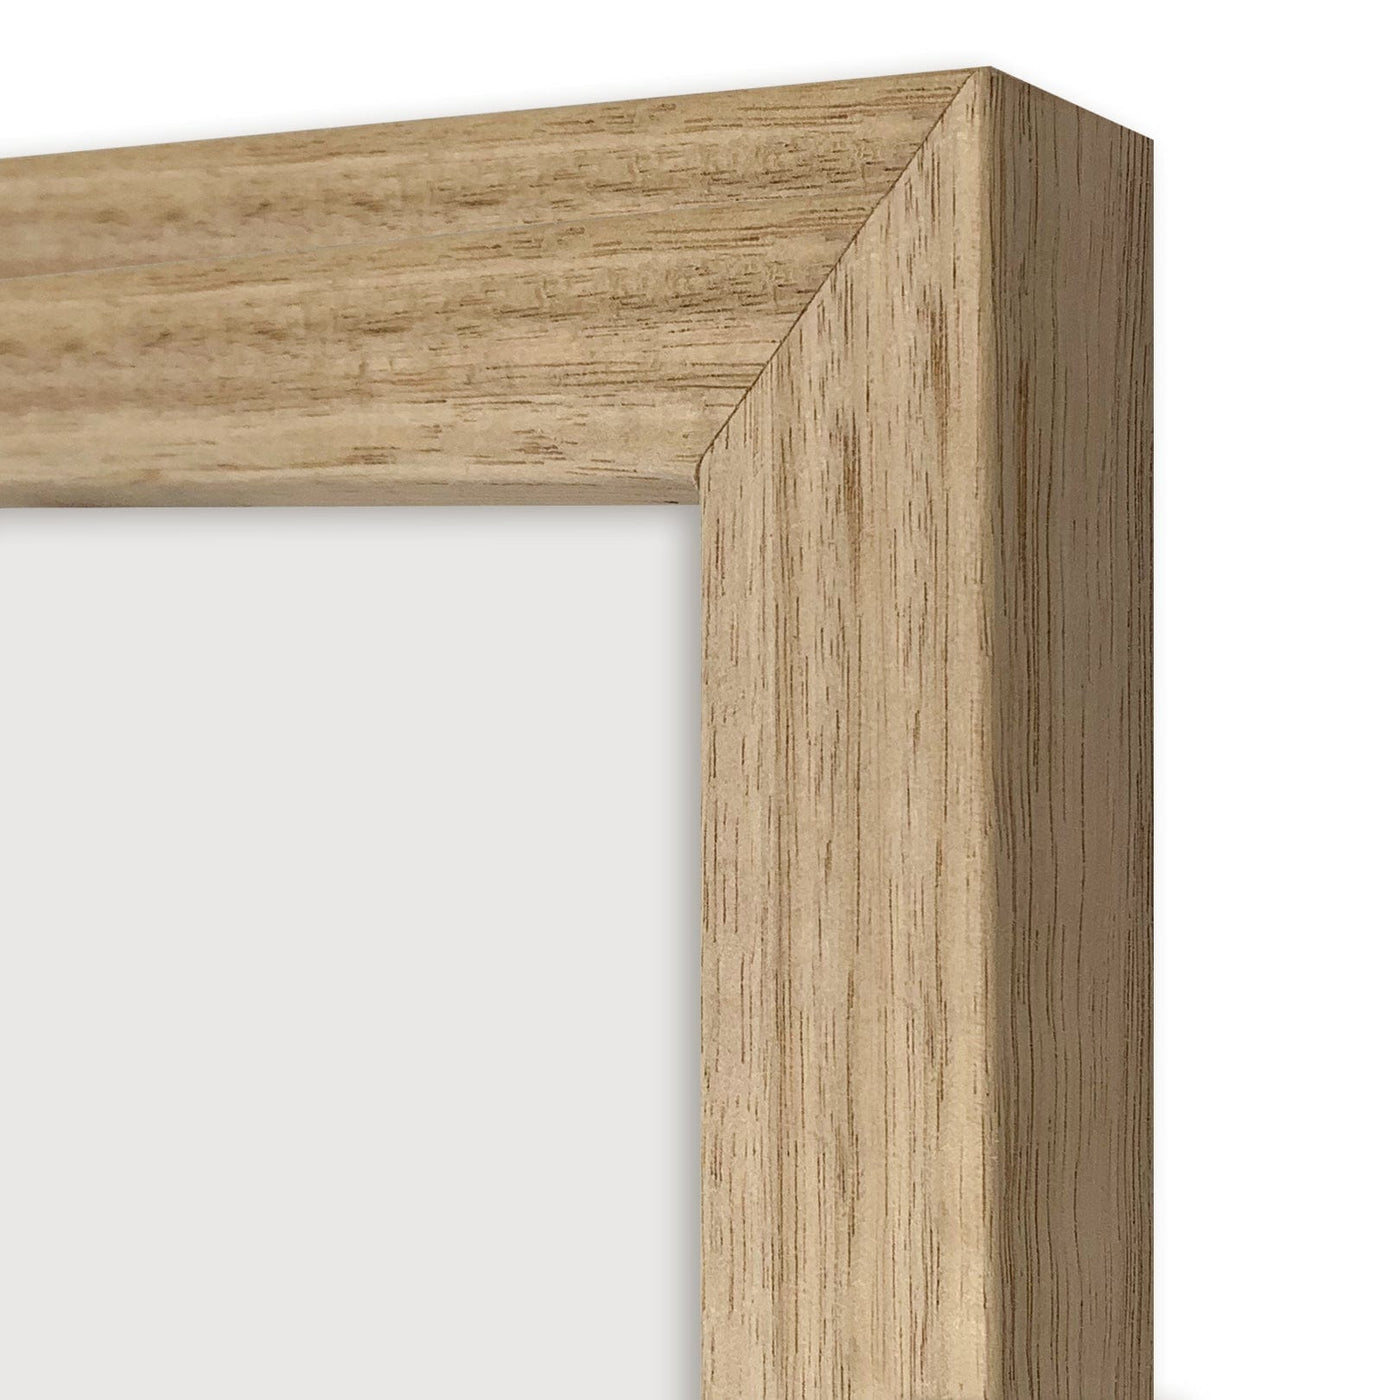 Classic Victorian Ash Picture Poster Frame from our Australian Made Picture Frames collection by Profile Products Australia